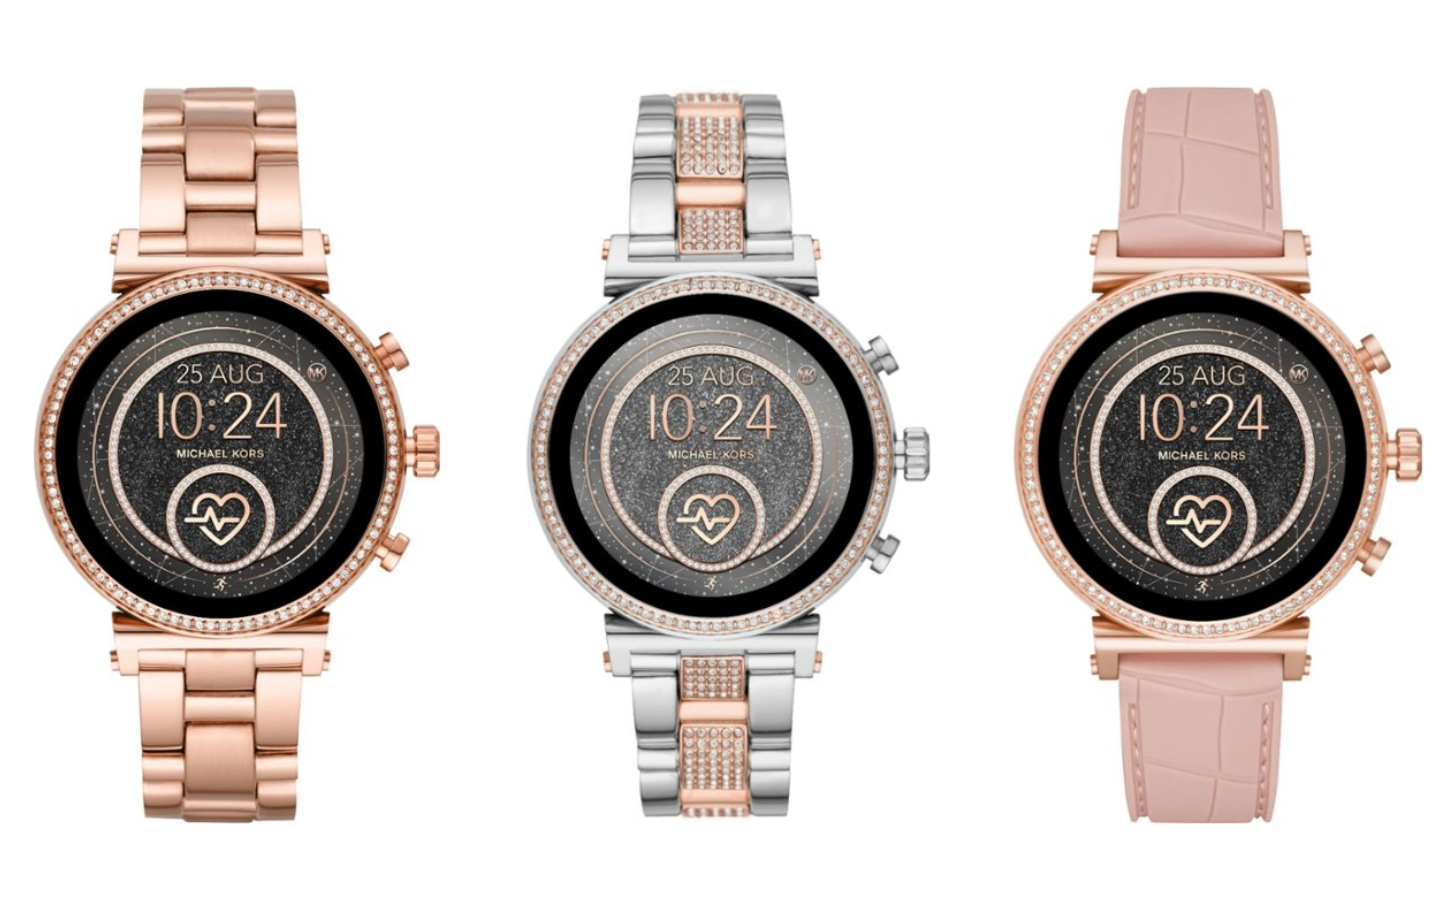 Michael Kors Access Sofie watches on sale for as low as $199 (up to ...